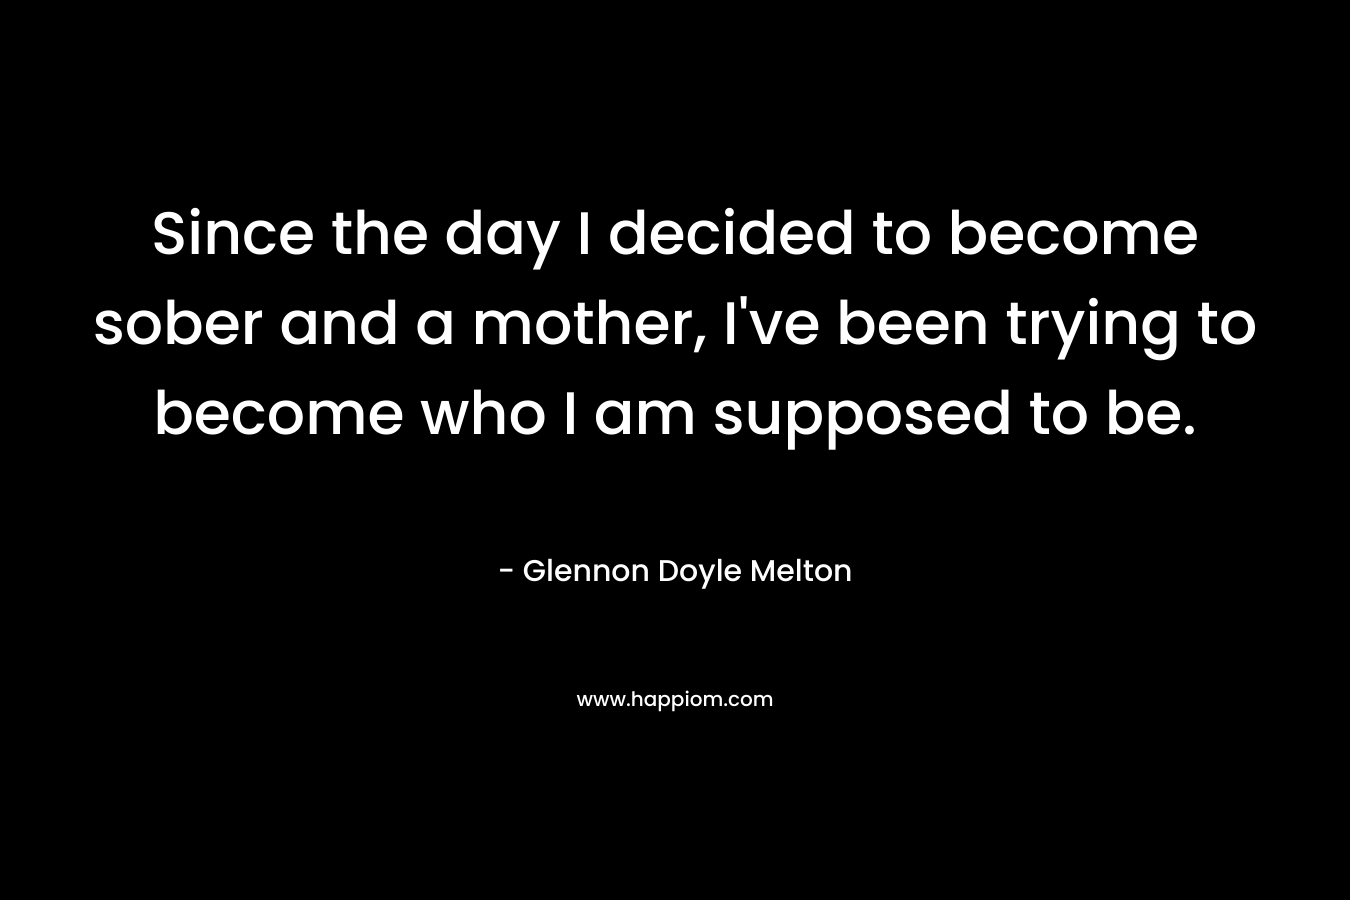 Since the day I decided to become sober and a mother, I’ve been trying to become who I am supposed to be. – Glennon Doyle Melton